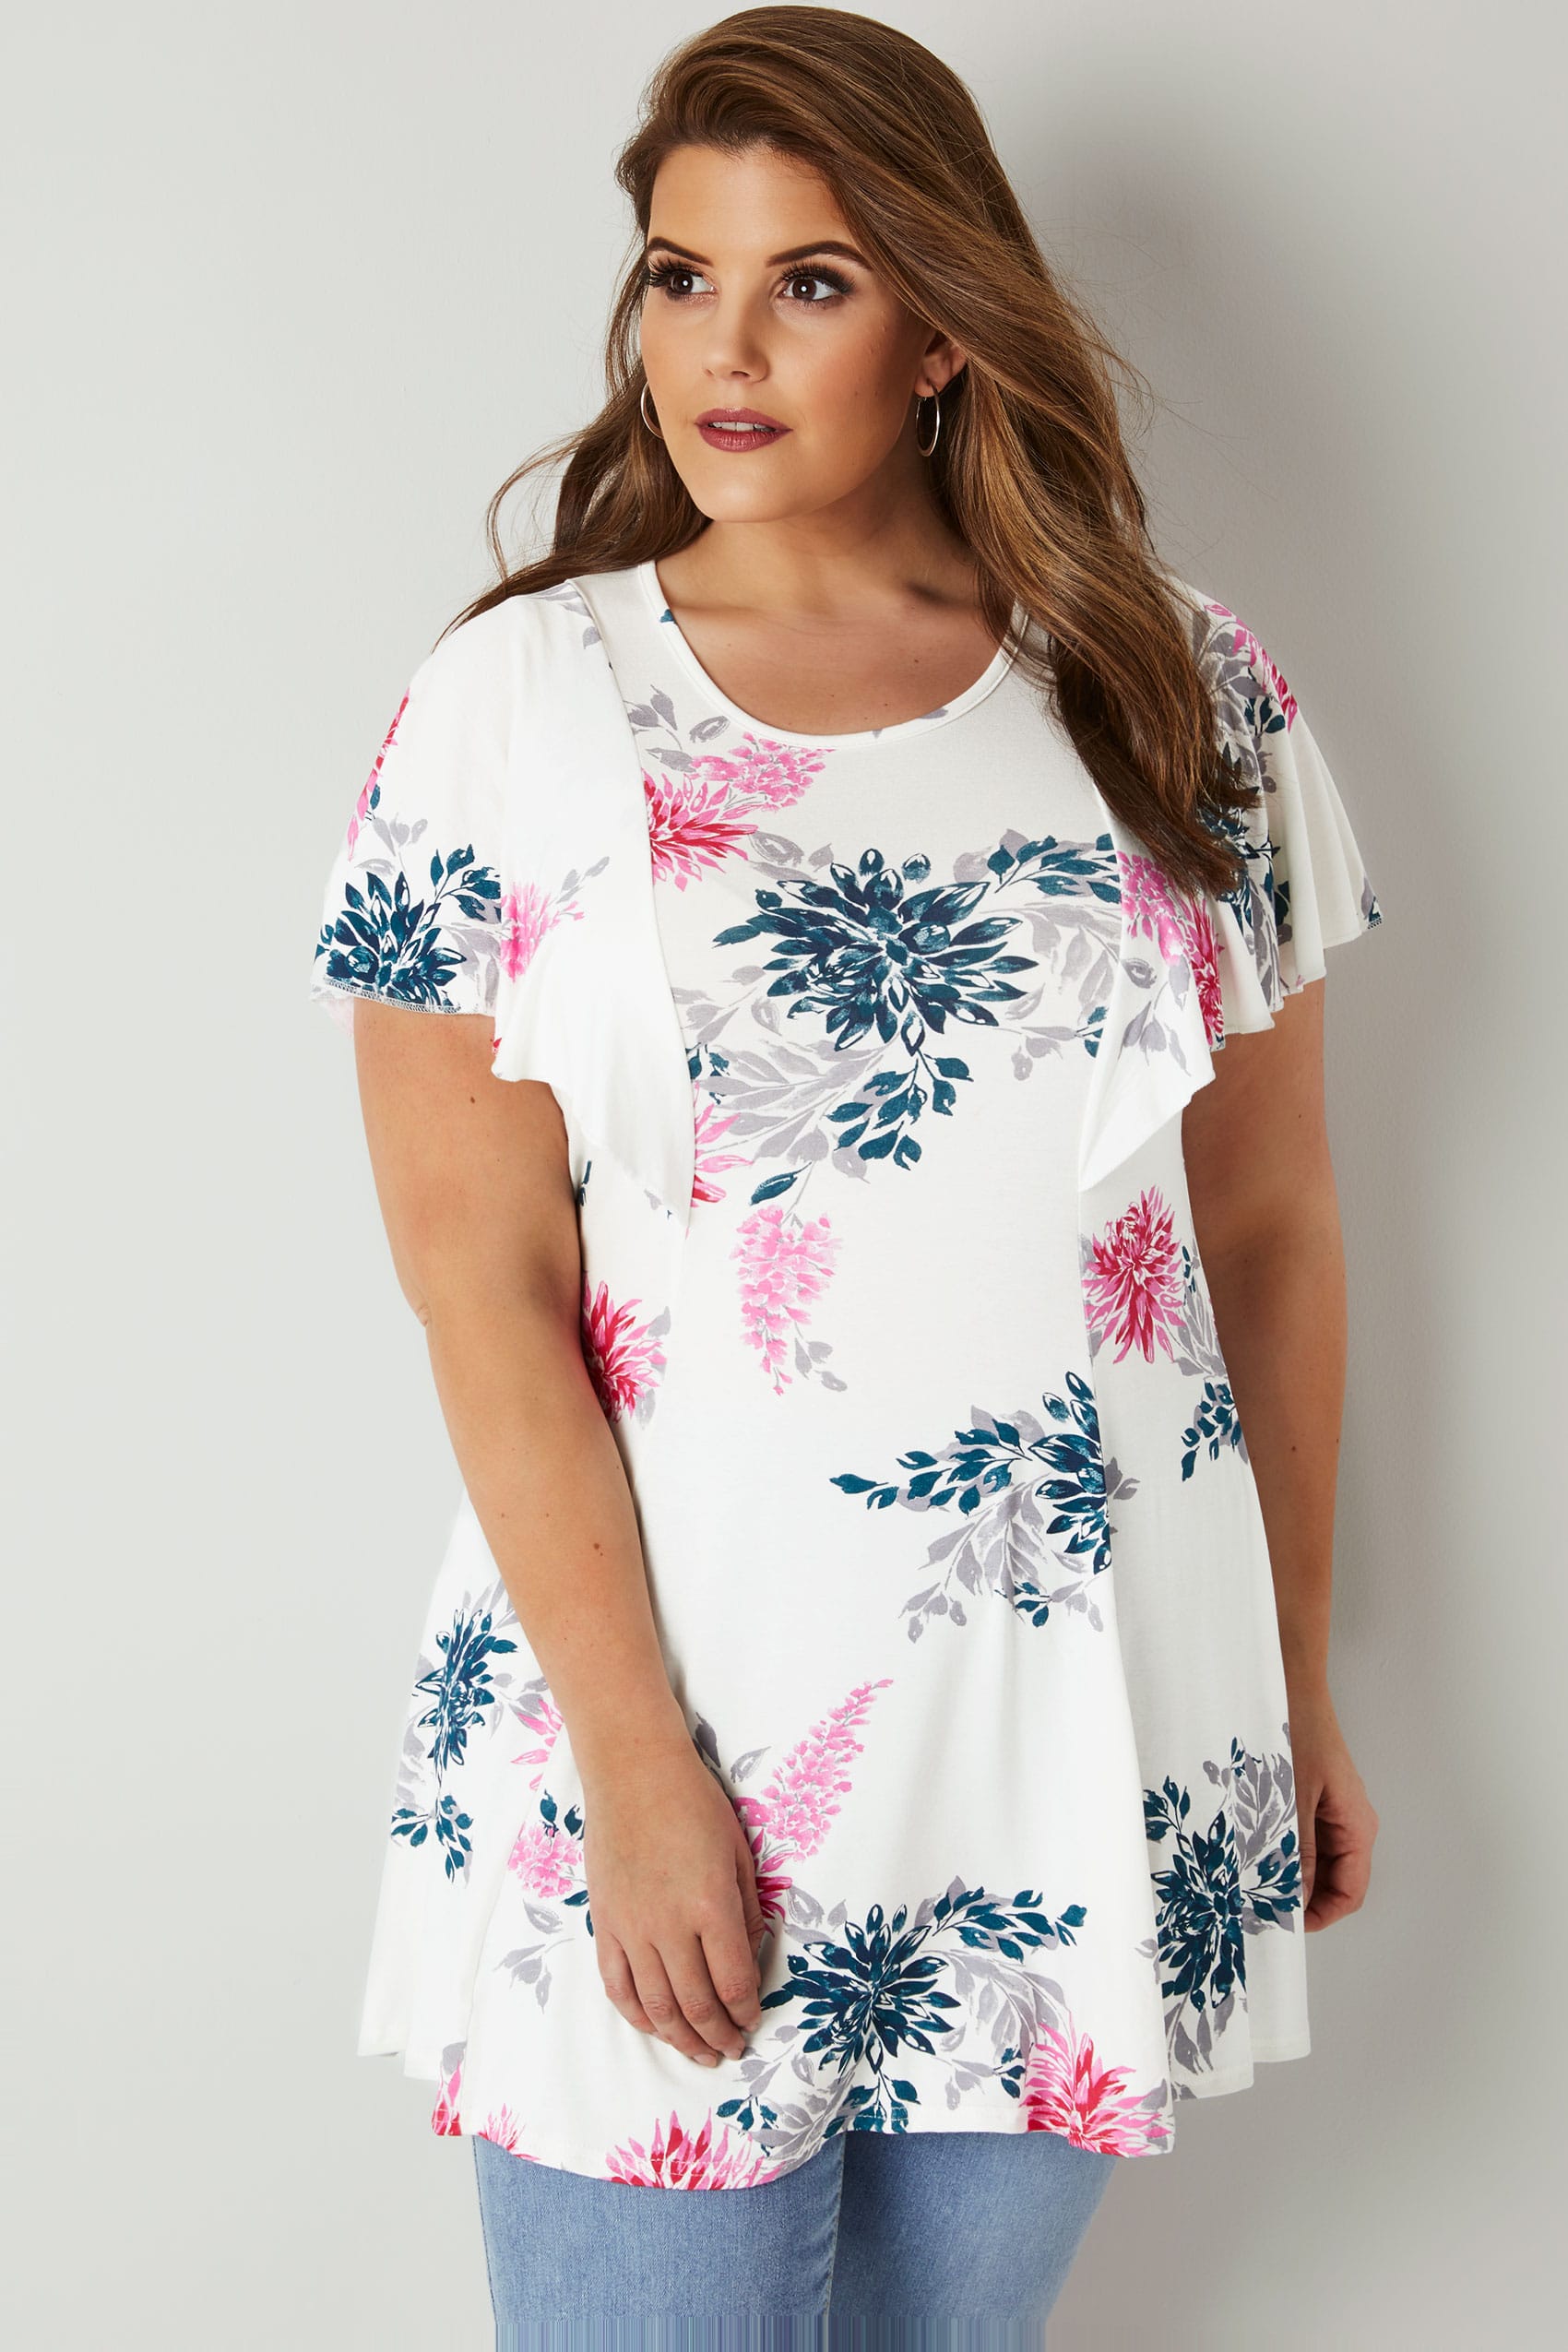 White & Pink Floral Print Peplum Top With Angel Sleeves, plus size 16 to 36